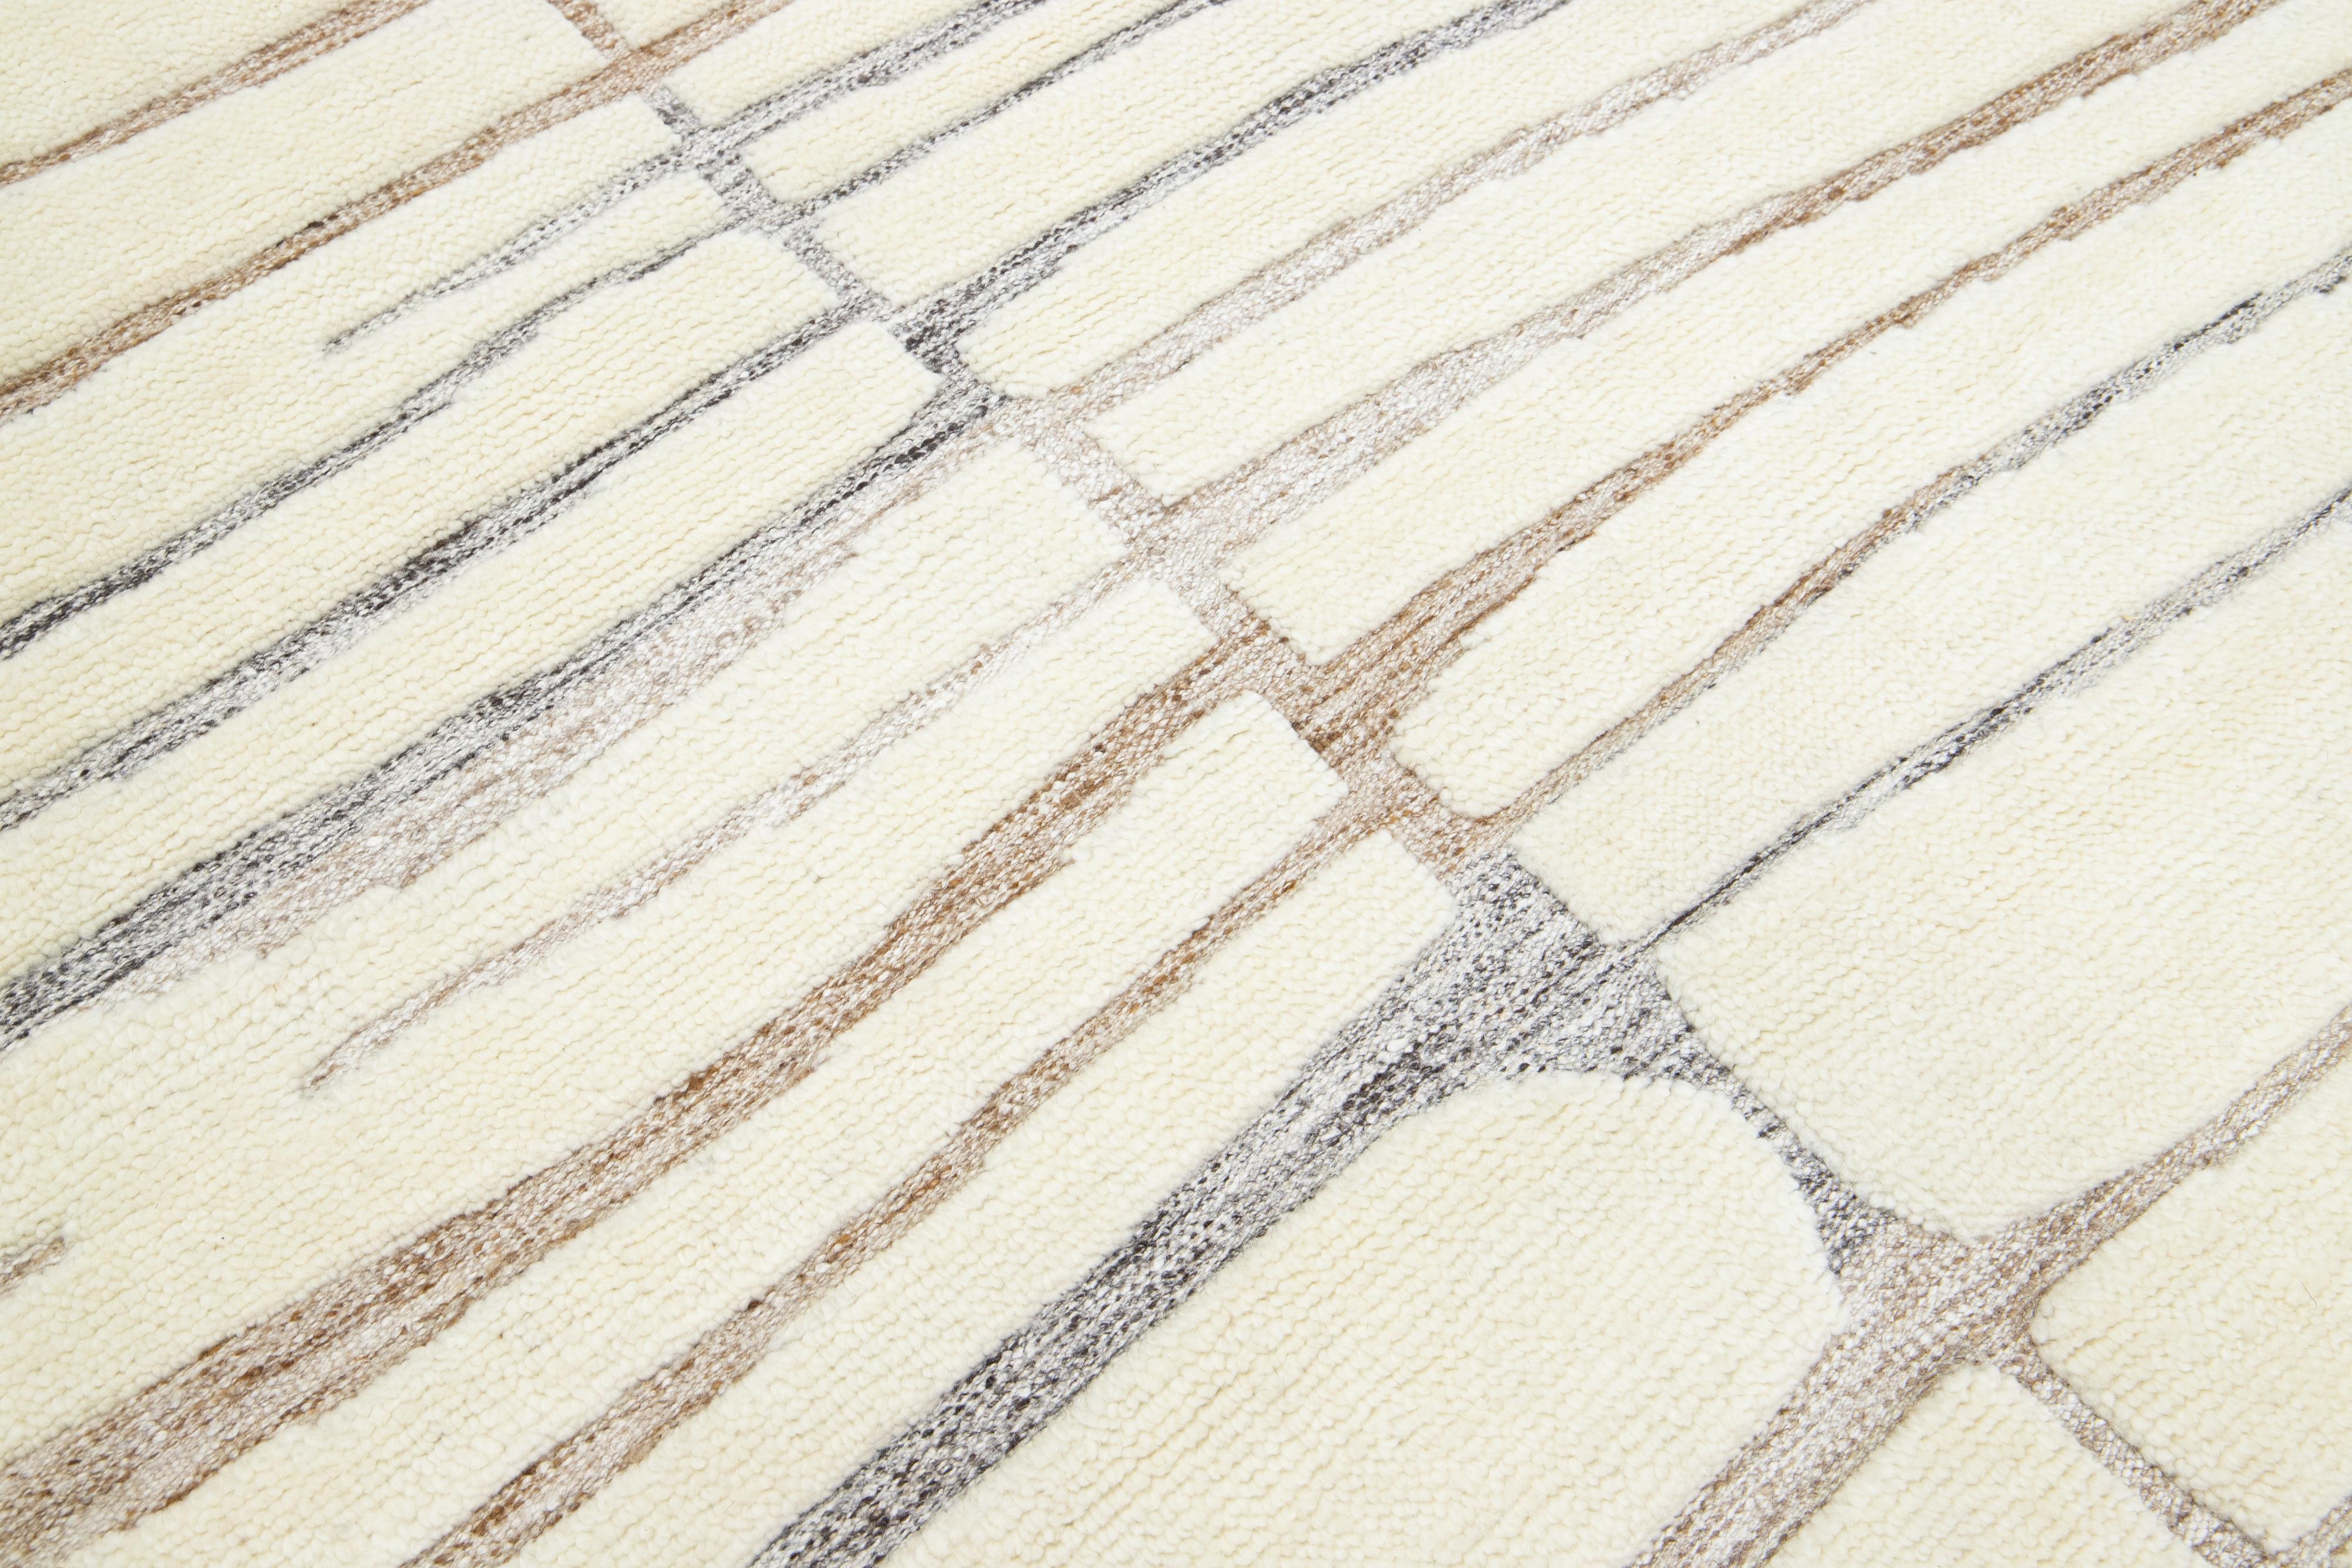 Contemporary Ivory Modern Moroccan-Style Wool Rug Handmade With a Striped Design By Apadana For Sale